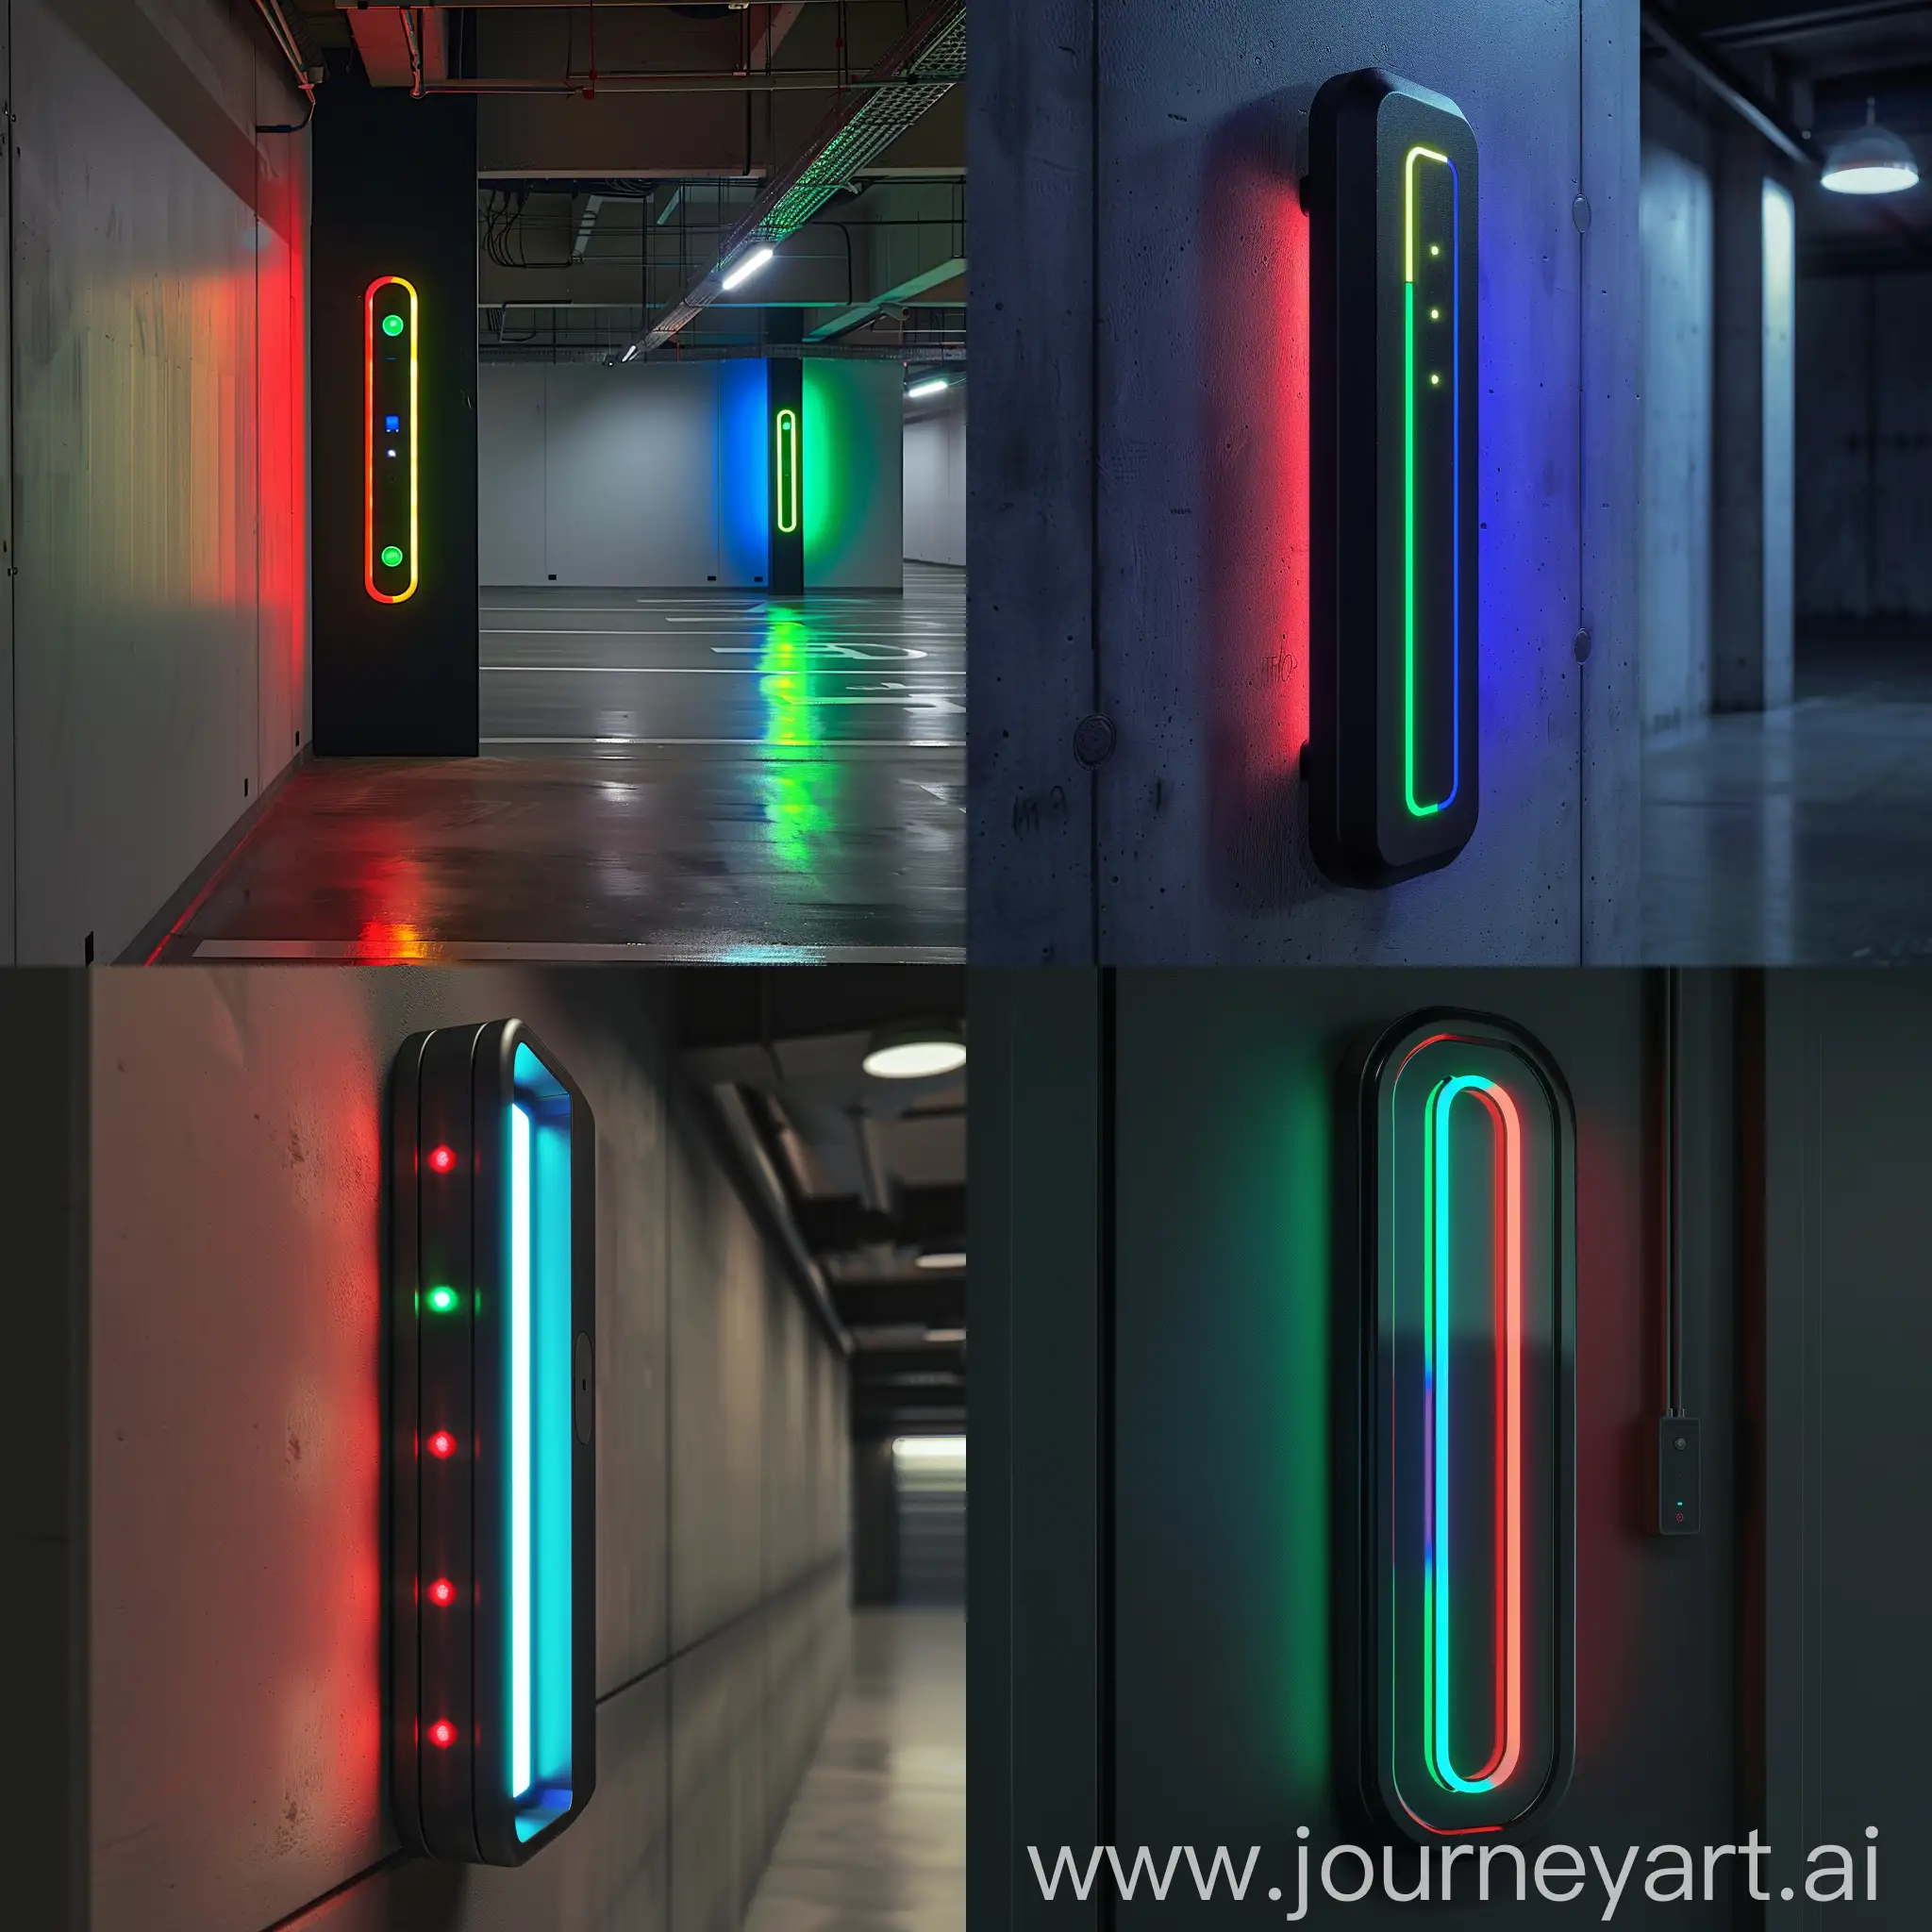 A sleek, modern indoor parking light design with three LED indicators: green for empty, red for full, and blue for reserved. The light should have a minimalist aesthetic with a smooth, black matte finish. It should include a power input and data port on the back, seamlessly integrated into the design. The LEDs should be bright and clearly visible, even in well-lit environments. The overall shape should be a compact rectangle with rounded edges, giving it a futuristic look.